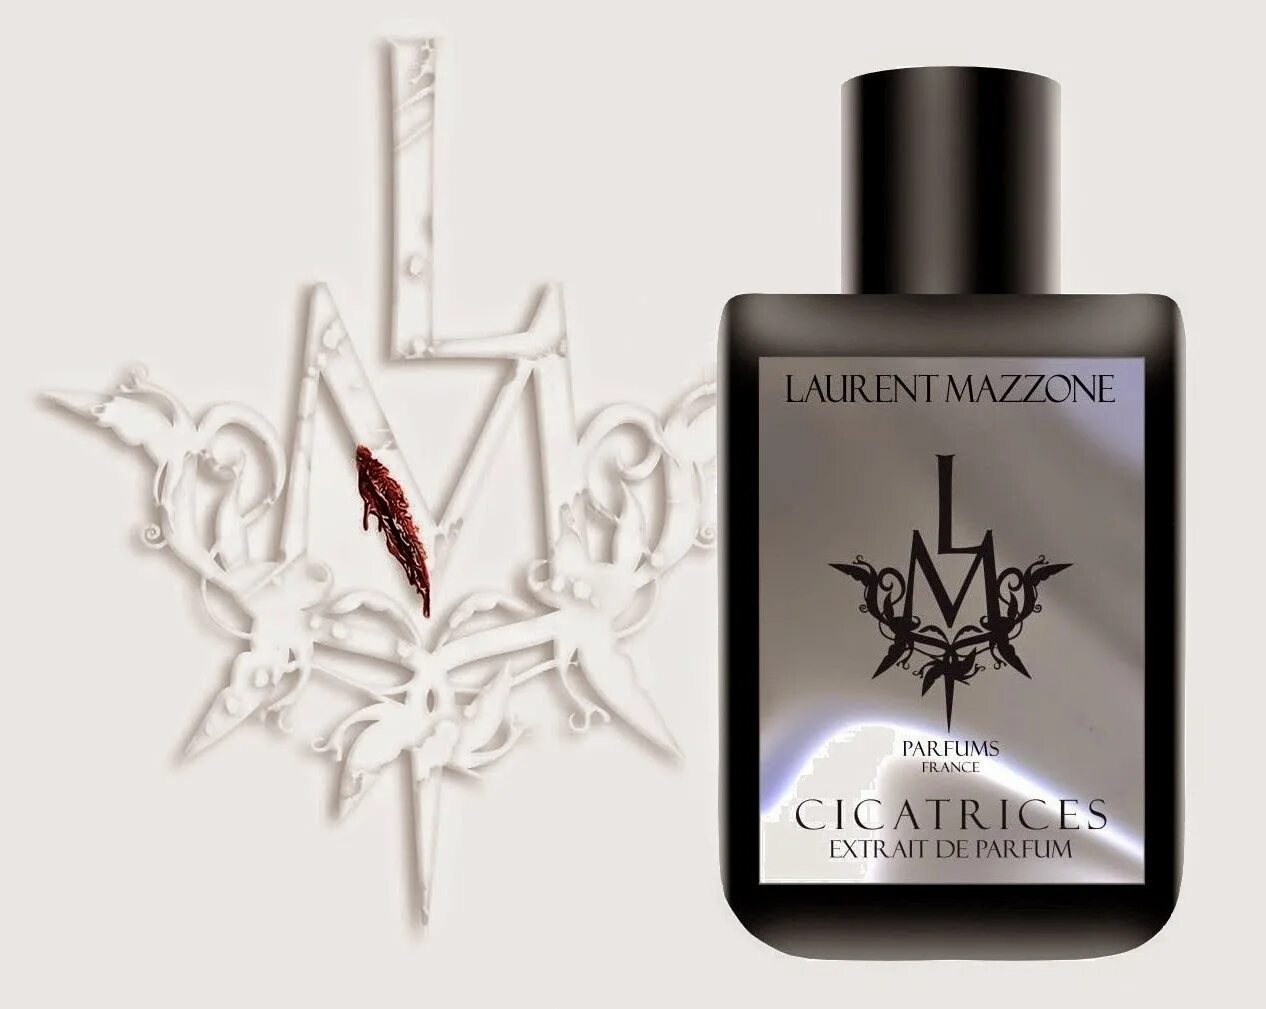 Mazzone pear. LM cicatrices Парфюм. LM Parfums (Laurent Mazzone Parfums) Dulce Pear. Laurent Mazzone духи. Sensual Orchid Laurent Mazzone Parfums.